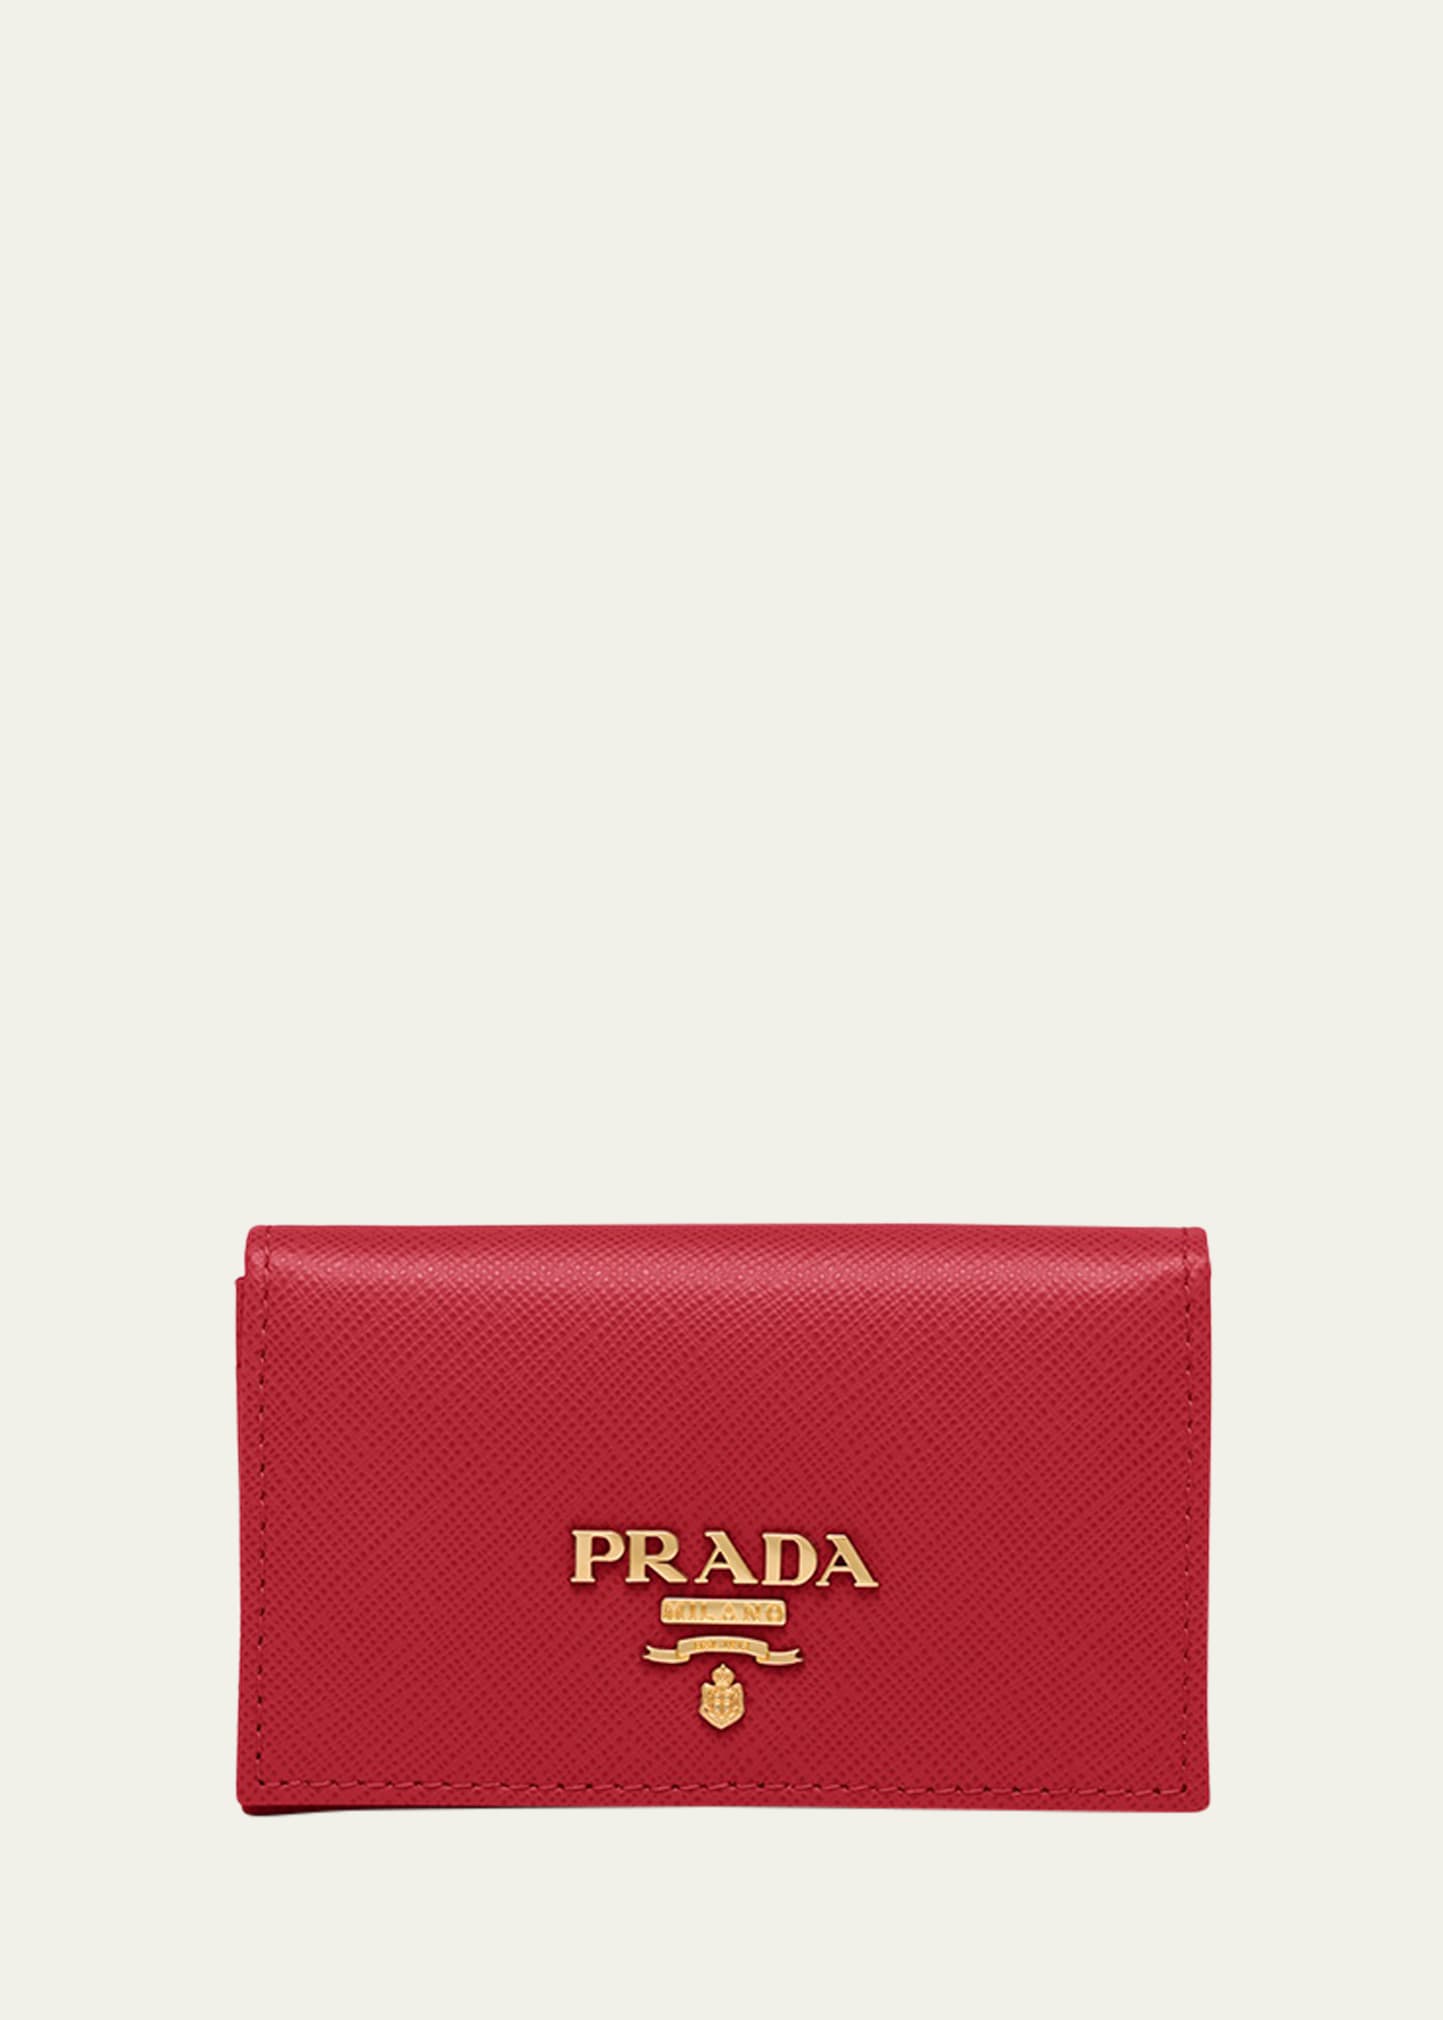 Prada Flap Leather Wallet In Red